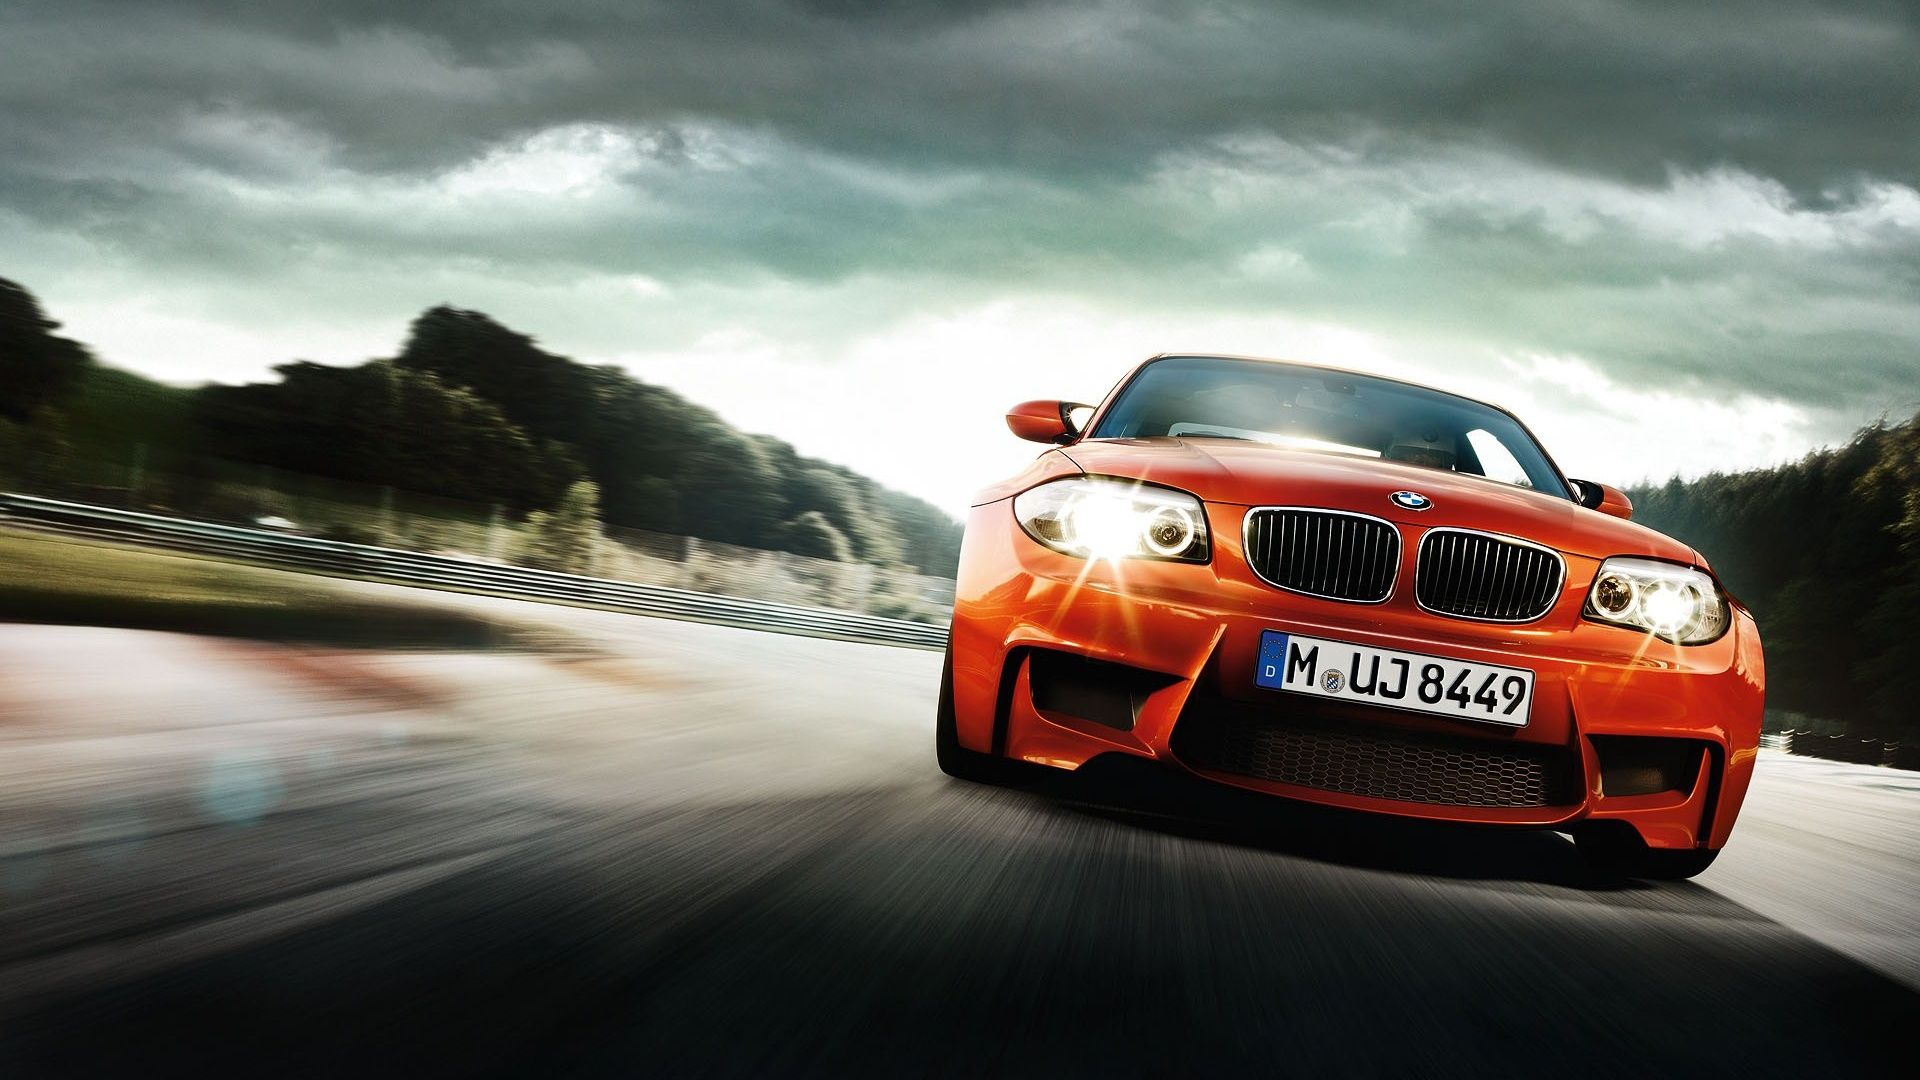 Car Wallpaper High Definition Attachment 14763 - HD Wallpapers Site